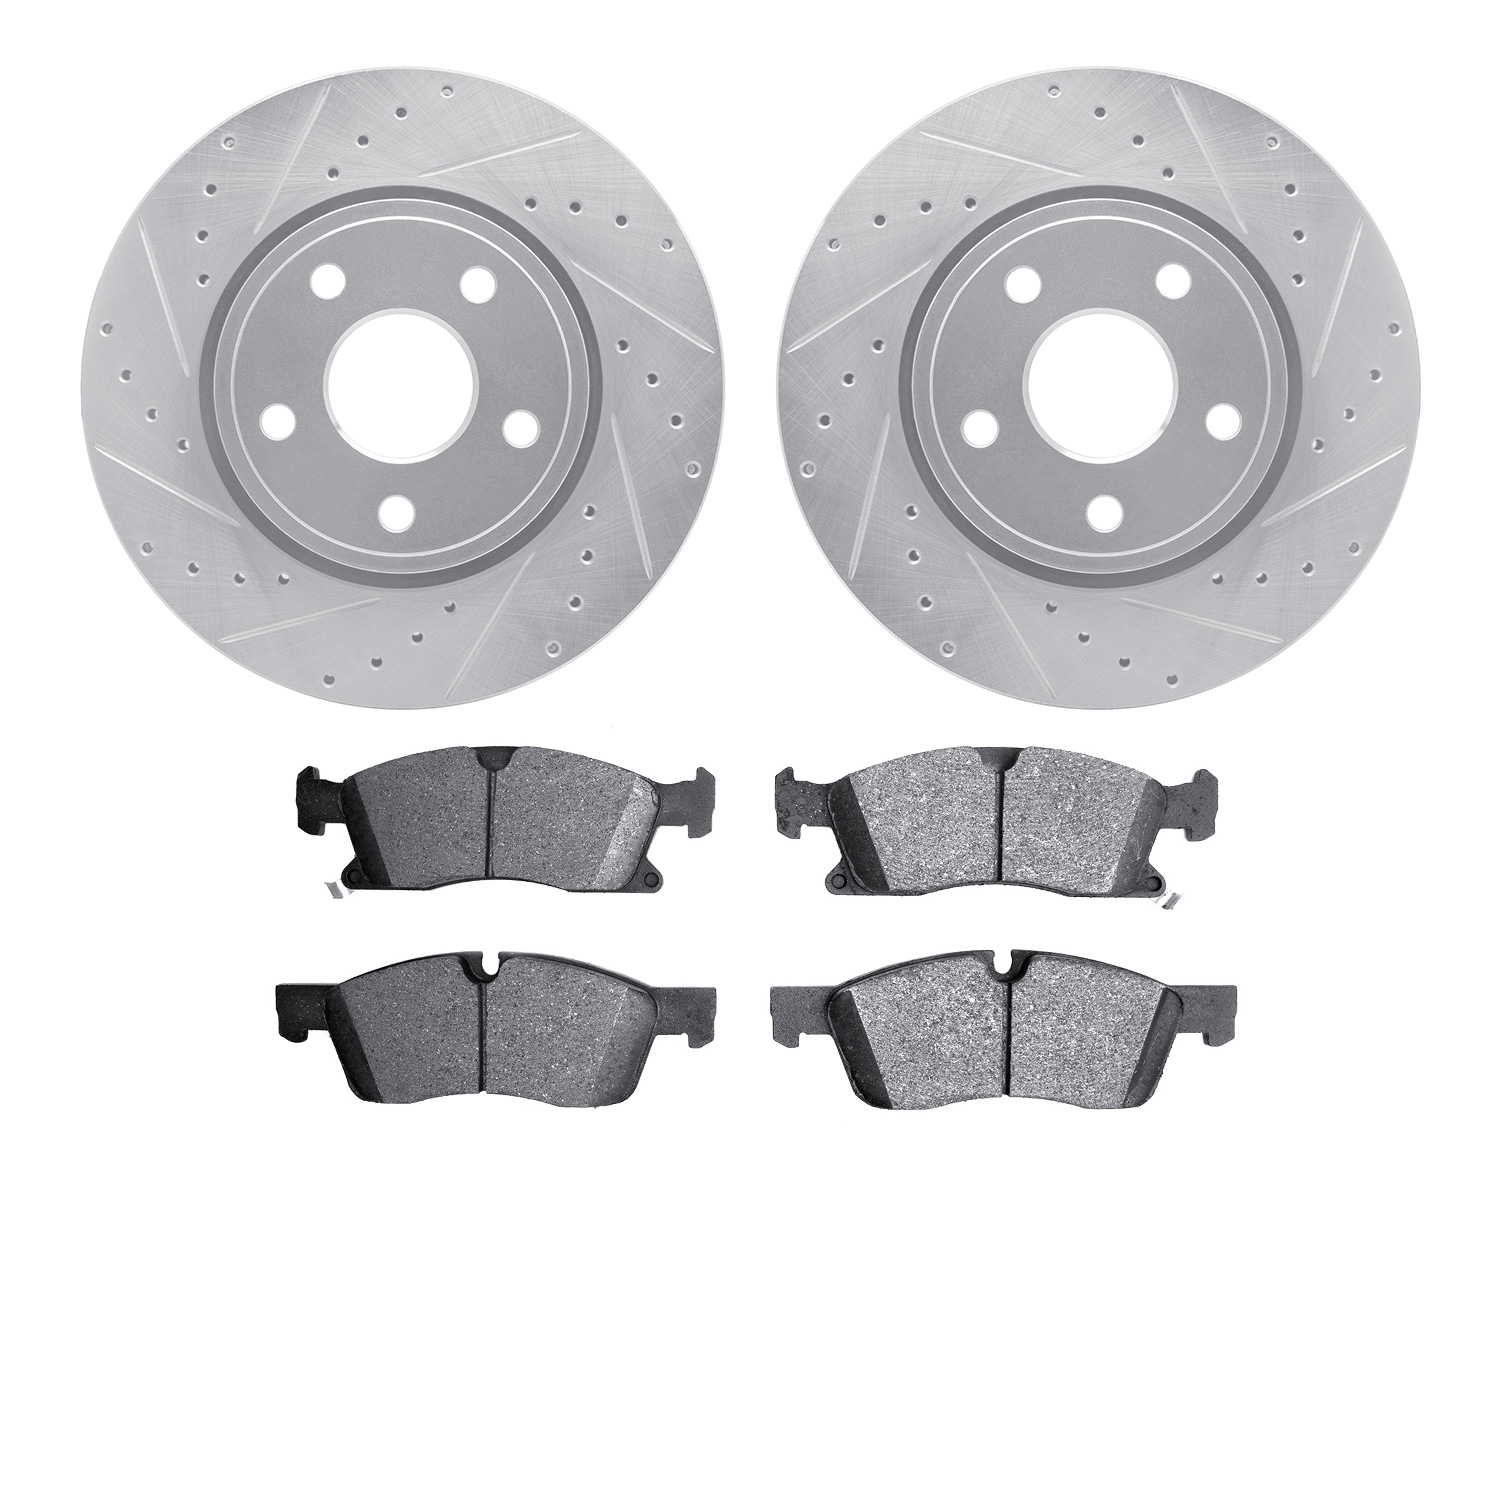 7402-42006 Drilled/Slotted Brake Rotors with Ultimate-Duty Brake Pads Kit [Silver], Fits Select Mopar, Position: Front